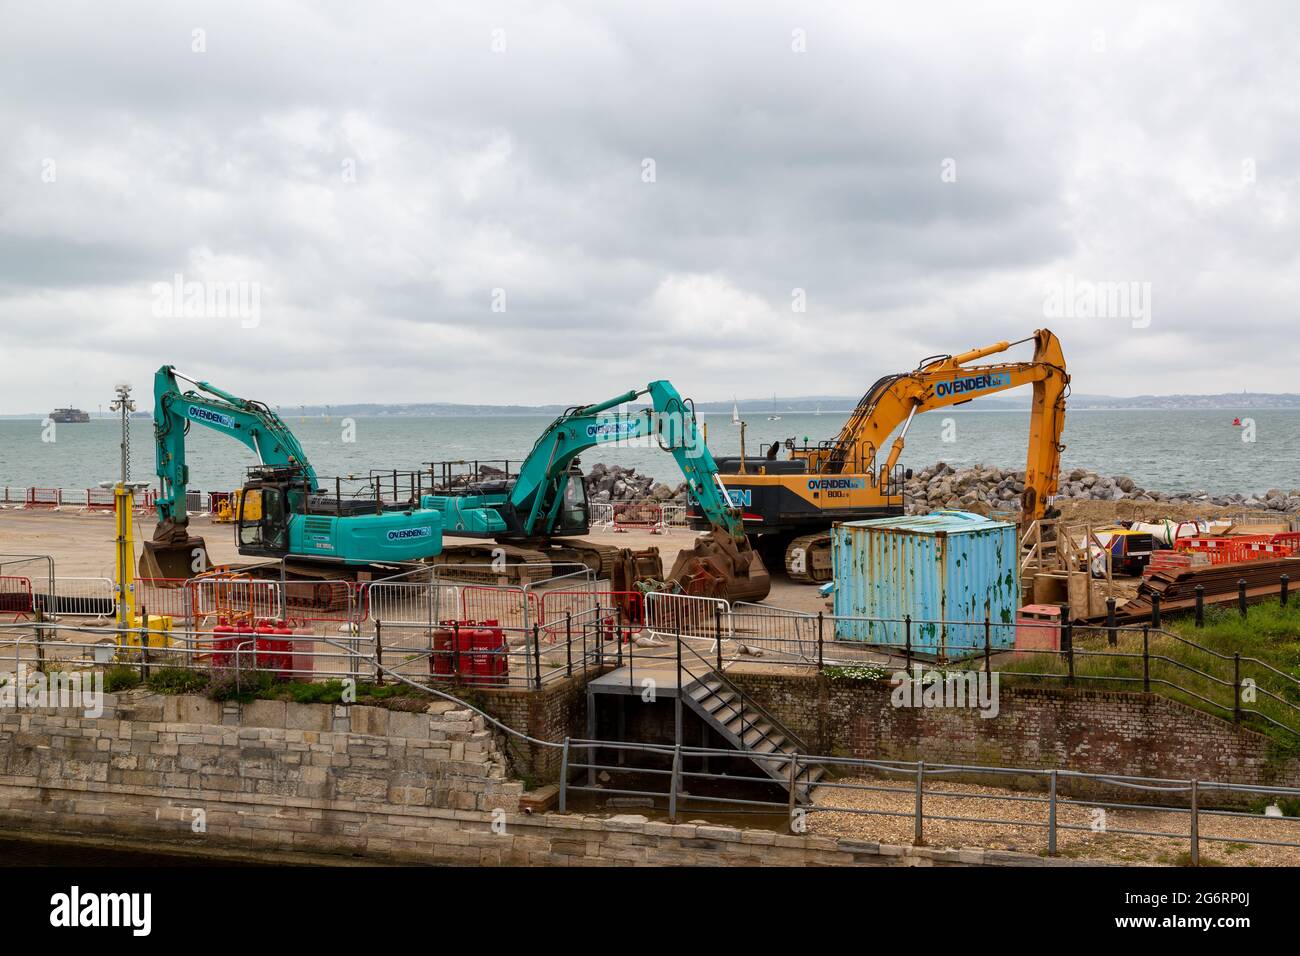 07-07-2021 Portsmouth, Hampshire, UK An excavator and a dumper working on coastal defences at Southsea with the sea in the background Stock Photo